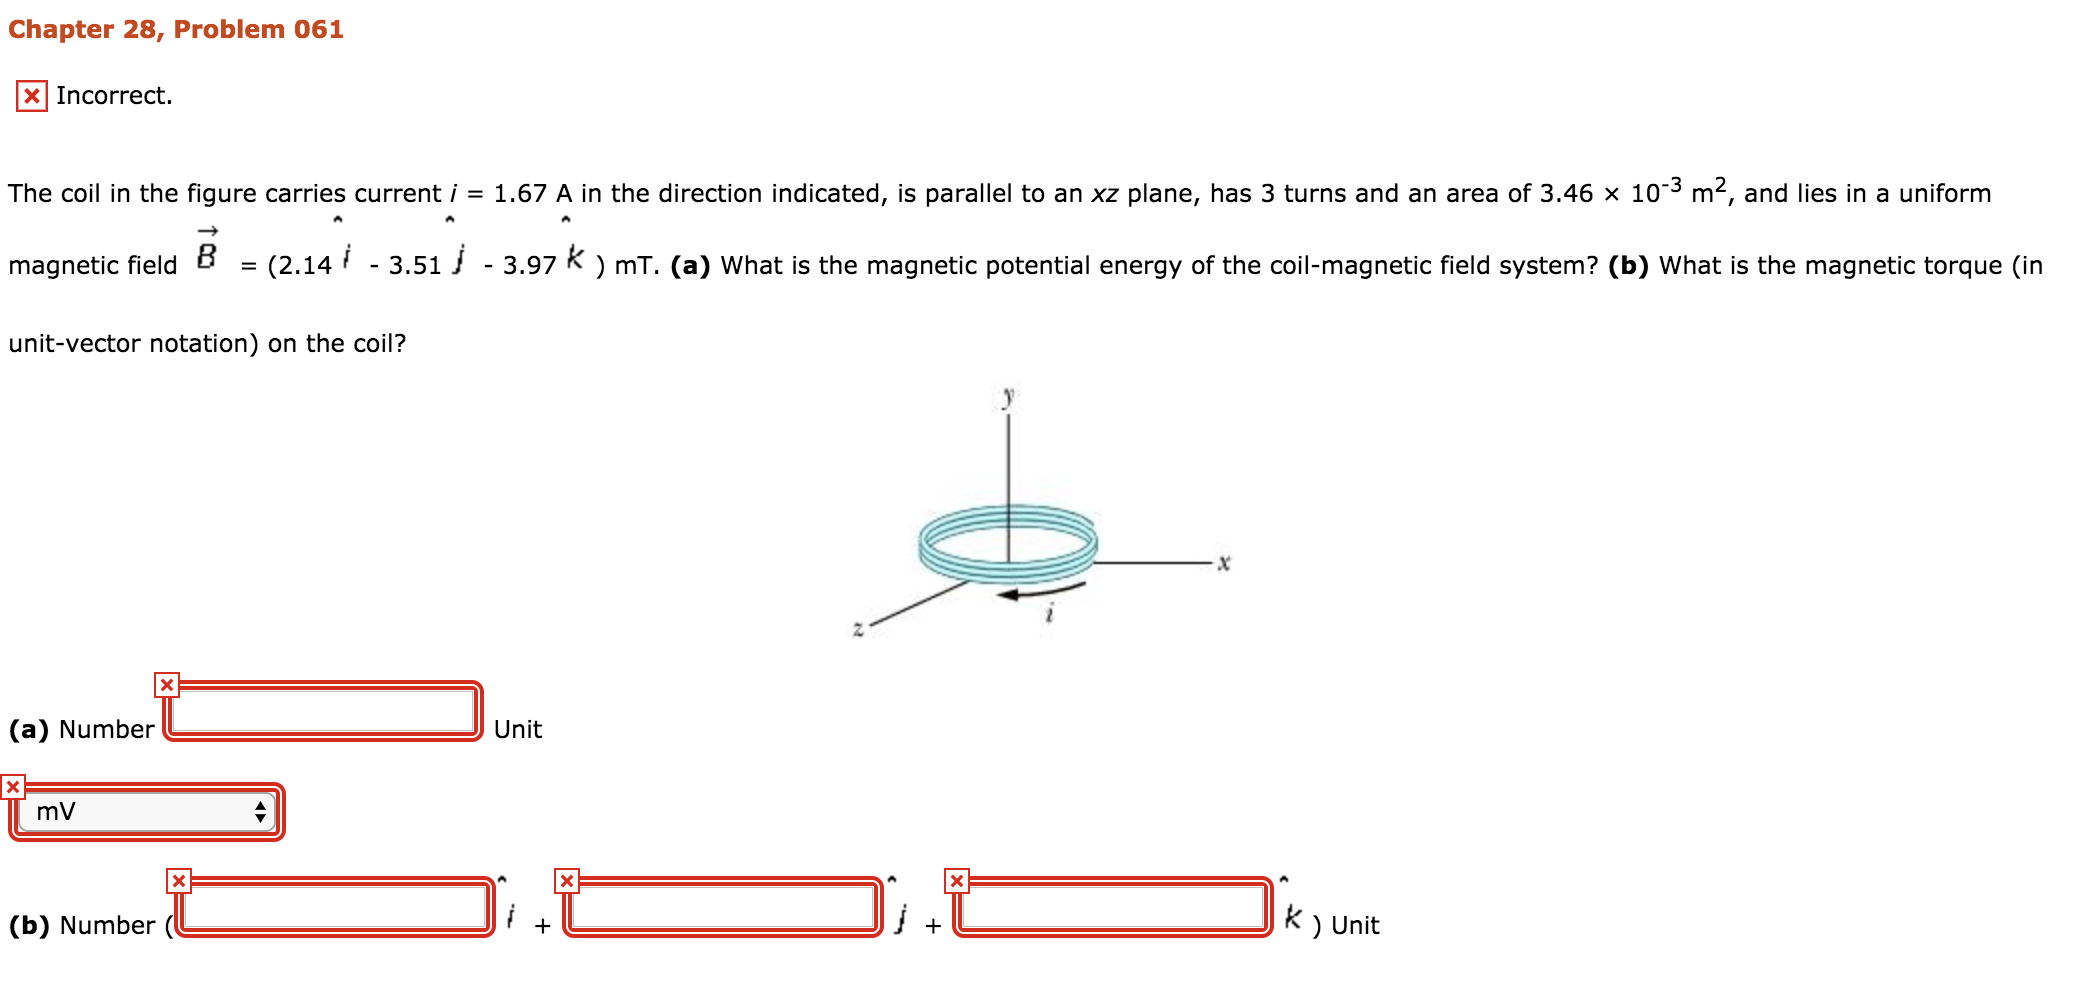 Chapter 28, Problem 061
E3 Incorrect
The coil in the figure carries current i = 1.67 A in the direction indicated, is parallel to an xz plane, has 3 turns and an area of 3.46 × 10-3 m2, and lies in a uniform
magnetic field B
unit-vector notation) on the coil?
= (2.14" -3.51」 -3.97 κ ) mT. (a) what is the magnetic potential energy of the coil-magnetic field system? (b) what is the magnetic torque (in
(a) Number
Unit
mV
Unit
(b) Number (
